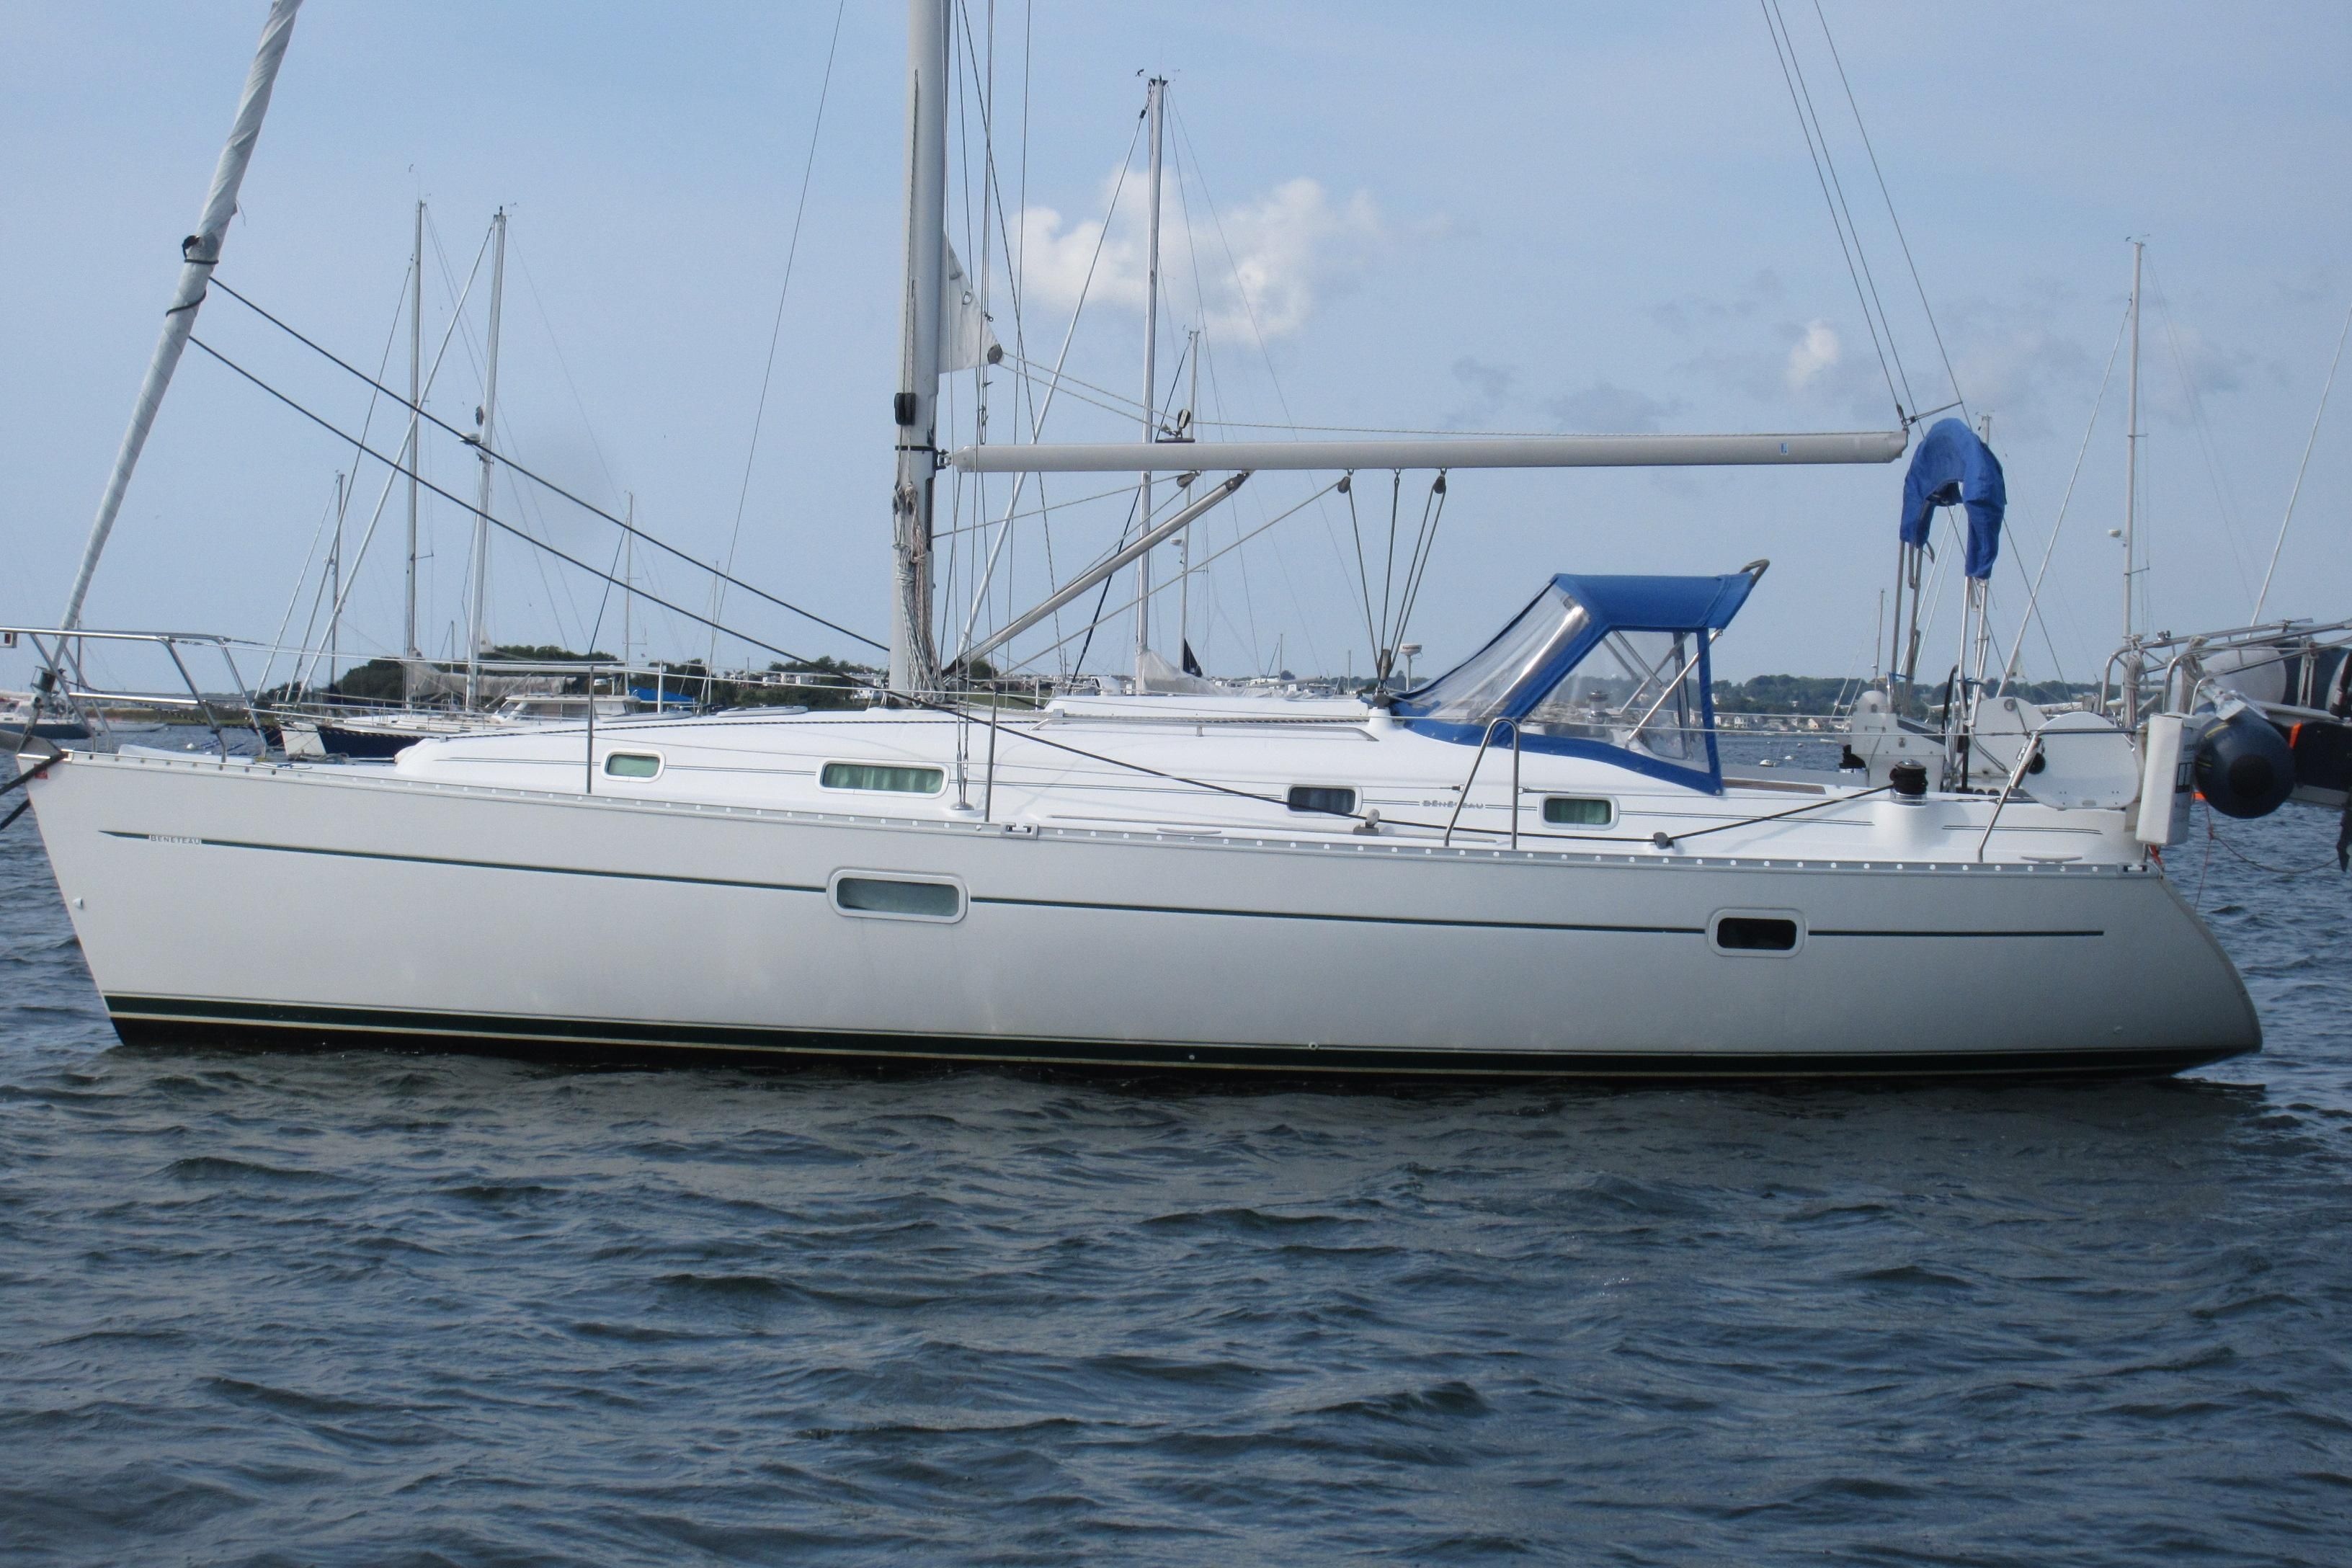 2004-beneteau-361-sail-new-and-used-boats-for-sale-www-yachtworld-co-uk